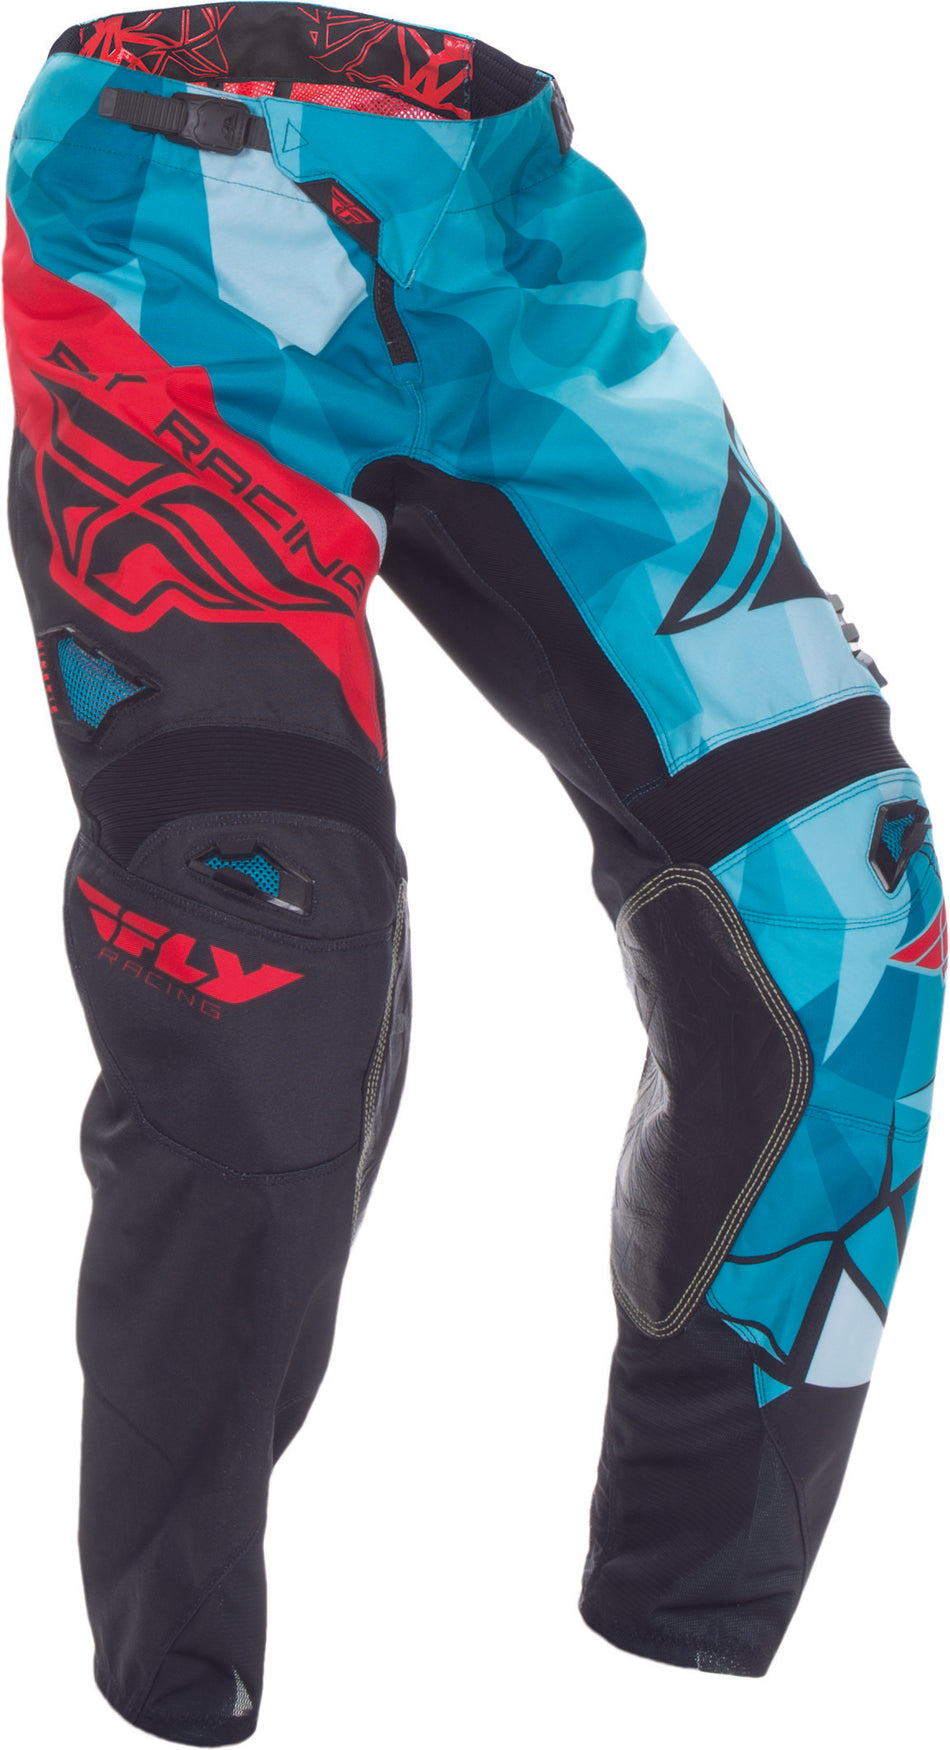 FLY RACING Kinetic Crux Pant Teal/Red Sz 26 370-53926